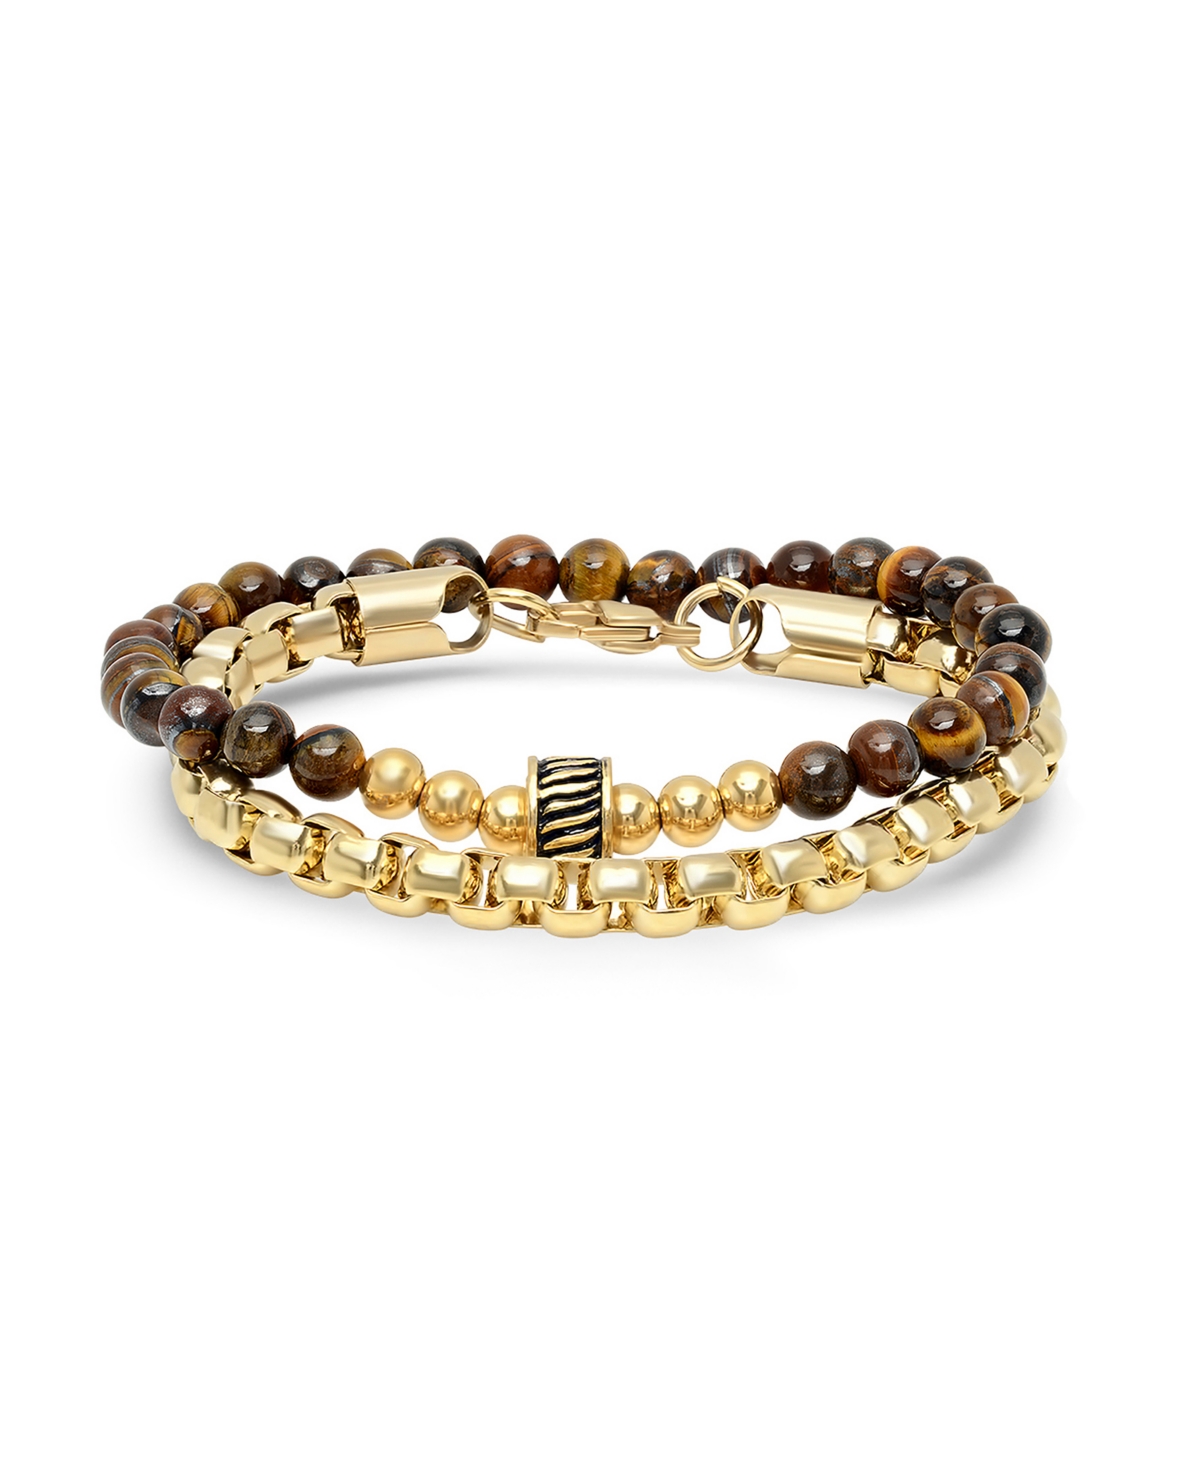 Men's 2 Pieces 18k Gold Plated Stainless Steel Rounded Box Chain Bracelet and Tiger Eye Beaded Bracelet Set - Gold Plated